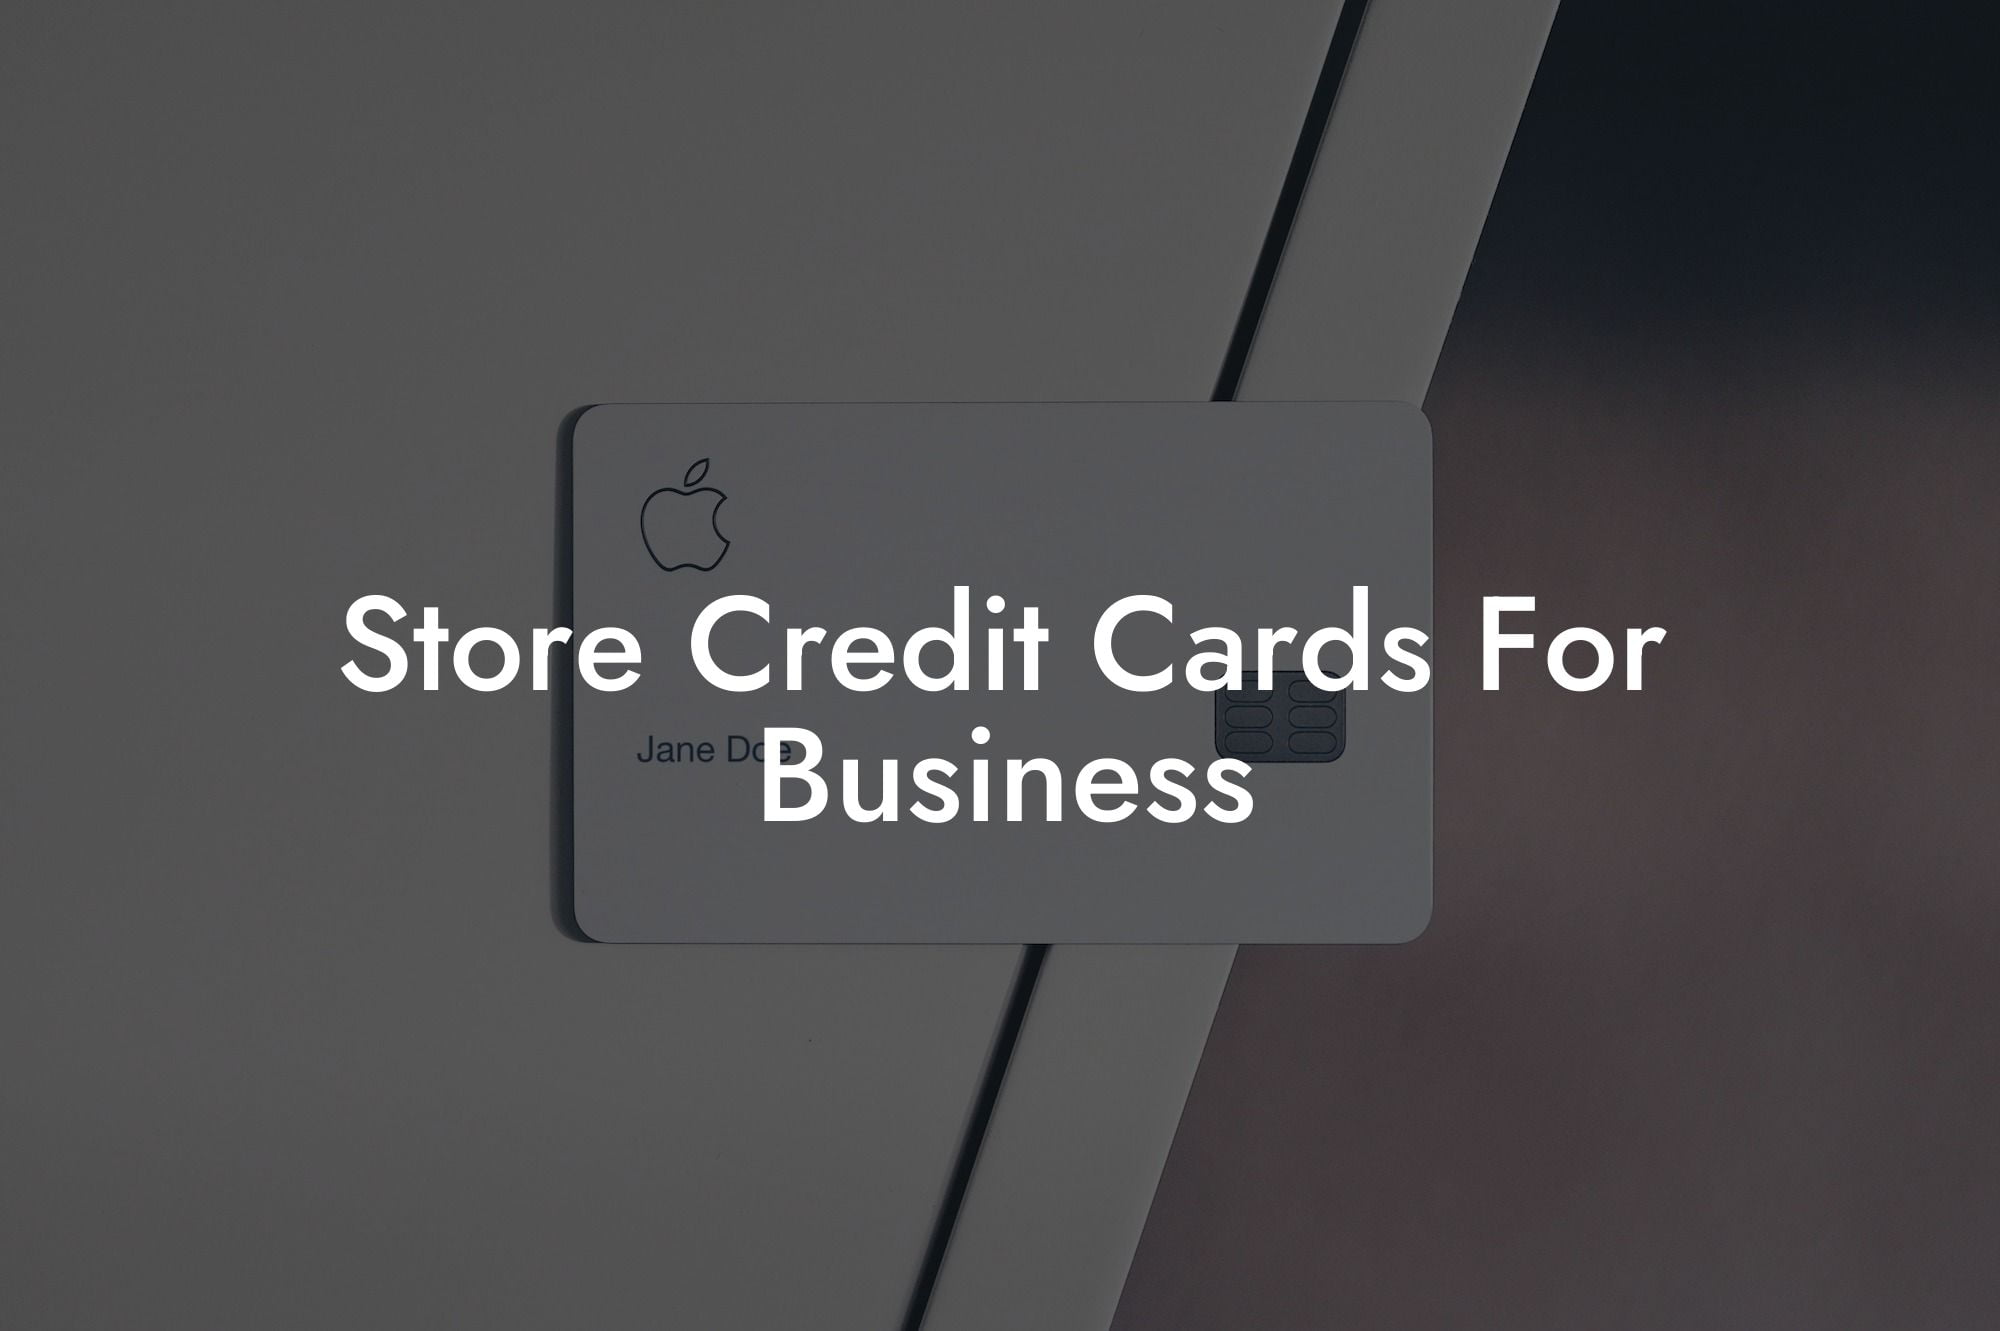 Store Credit Cards For Business